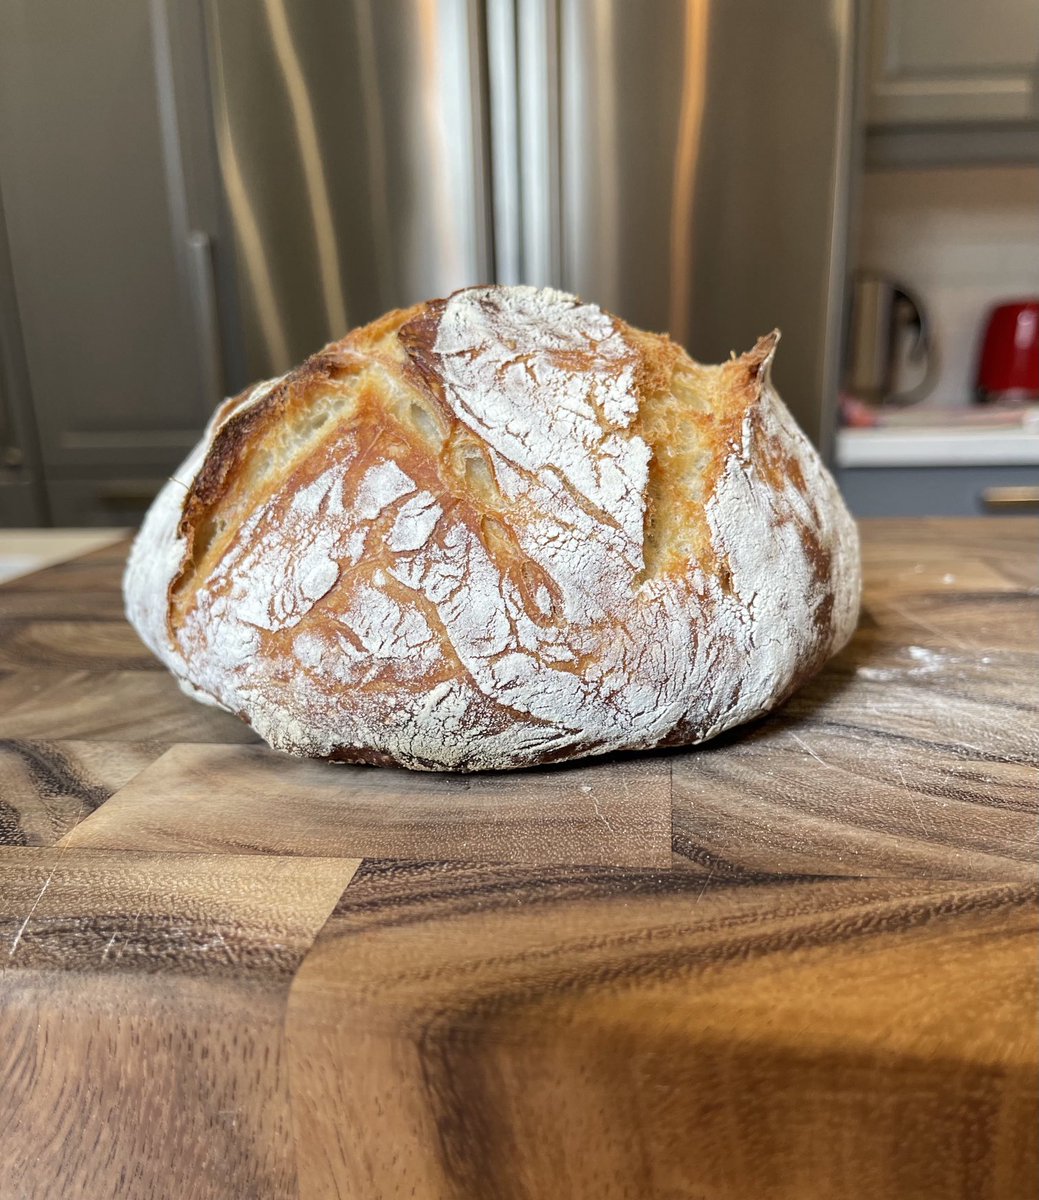 Worth experimenting with dough rising for that famous New York no-knead bread recipe. This one is by rising the dough in the fridge for 4 days. It is a completely different taste from the regular 12-18 hour option. Way better, more subtle…